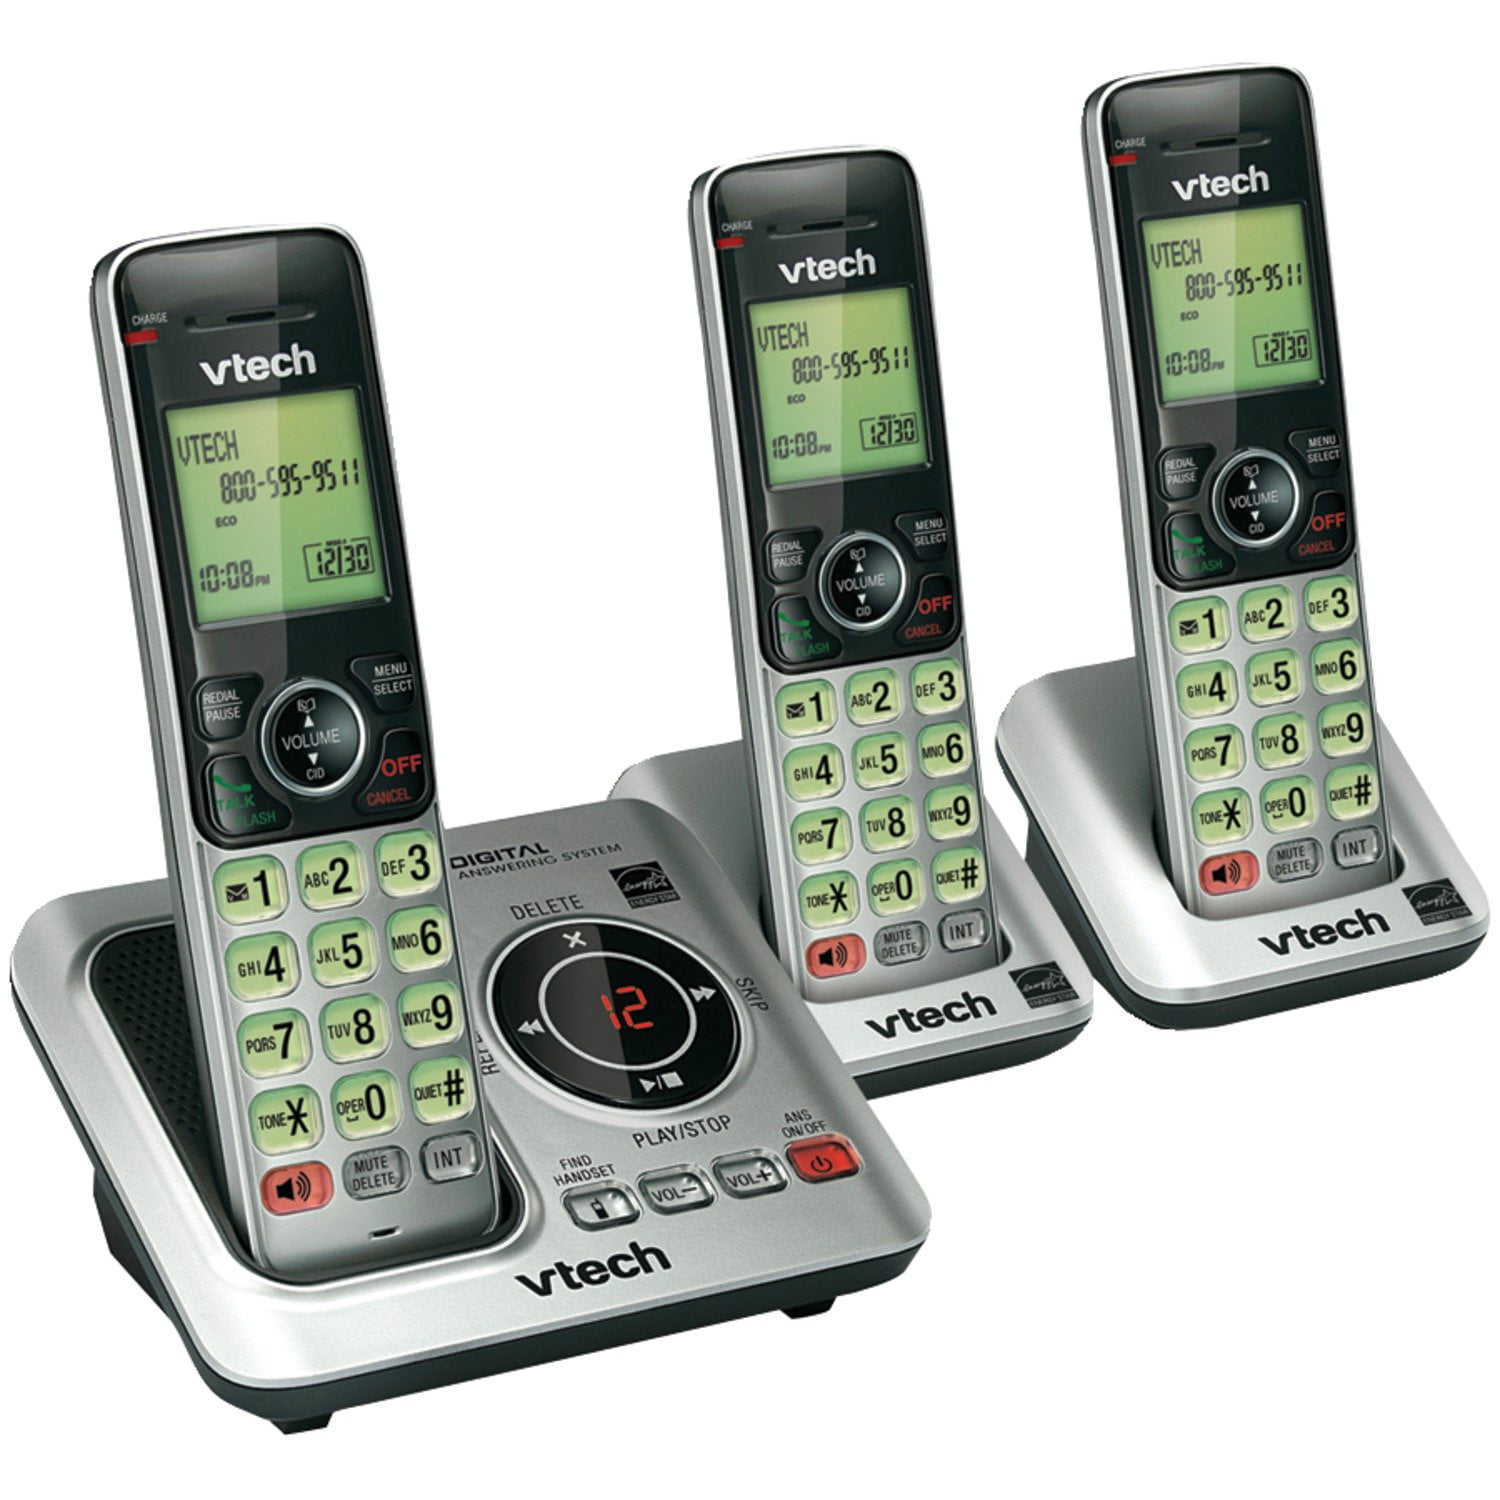 Wall-Mountable Expandable up to 5 Handsets Silver/Black VTech CS6429-3 3-Handset DECT 6.0 Cordless Phone with Answering System and Caller ID 